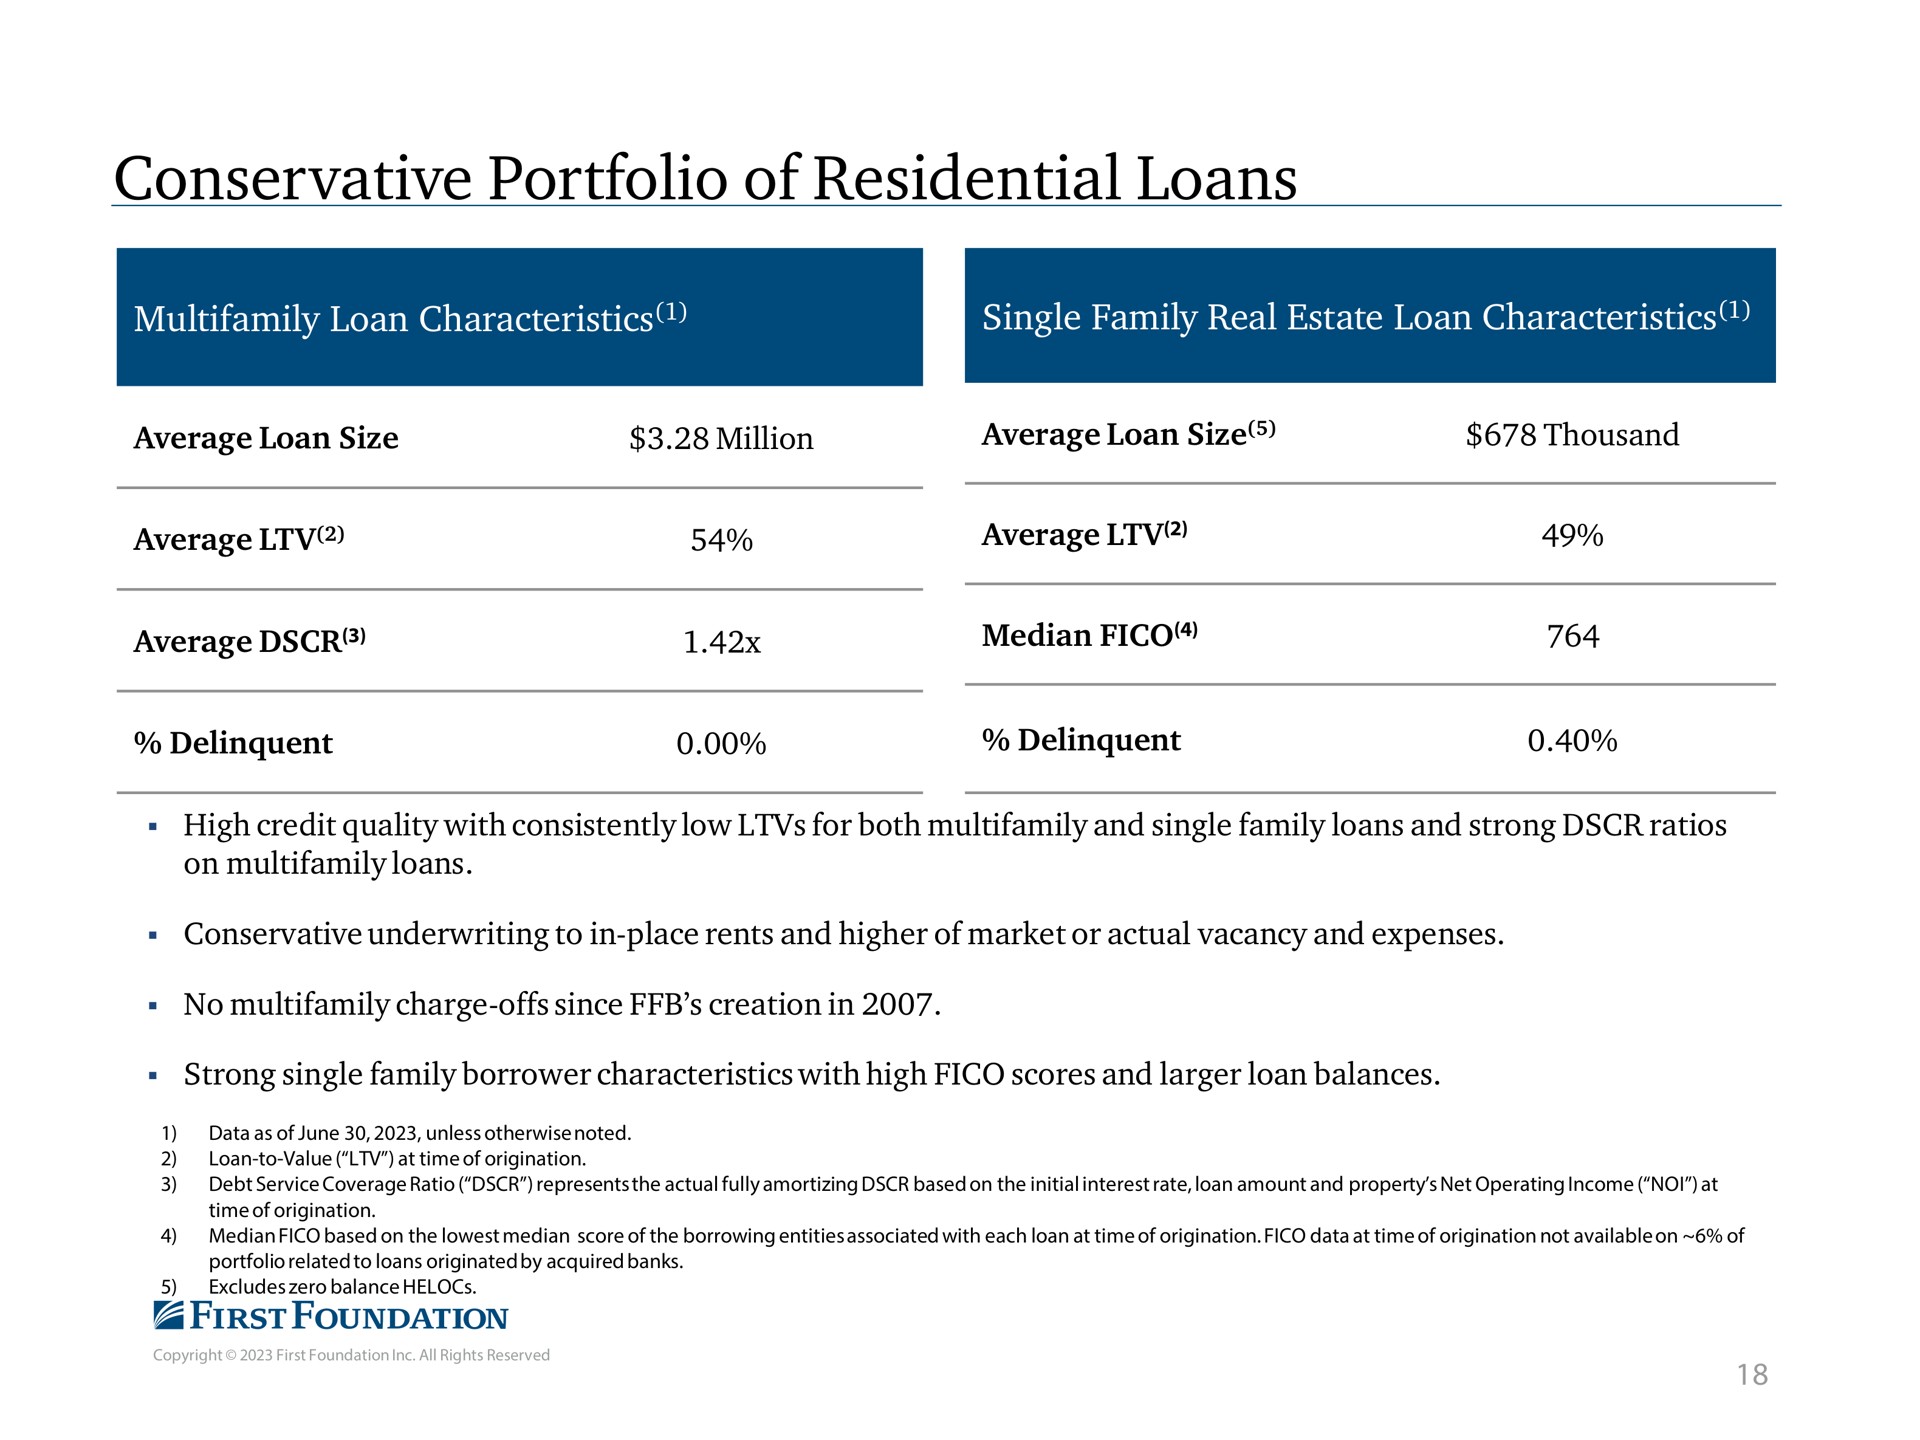 conservative portfolio of residential loans loan characteristics single family real estate loan characteristics | First Foundation